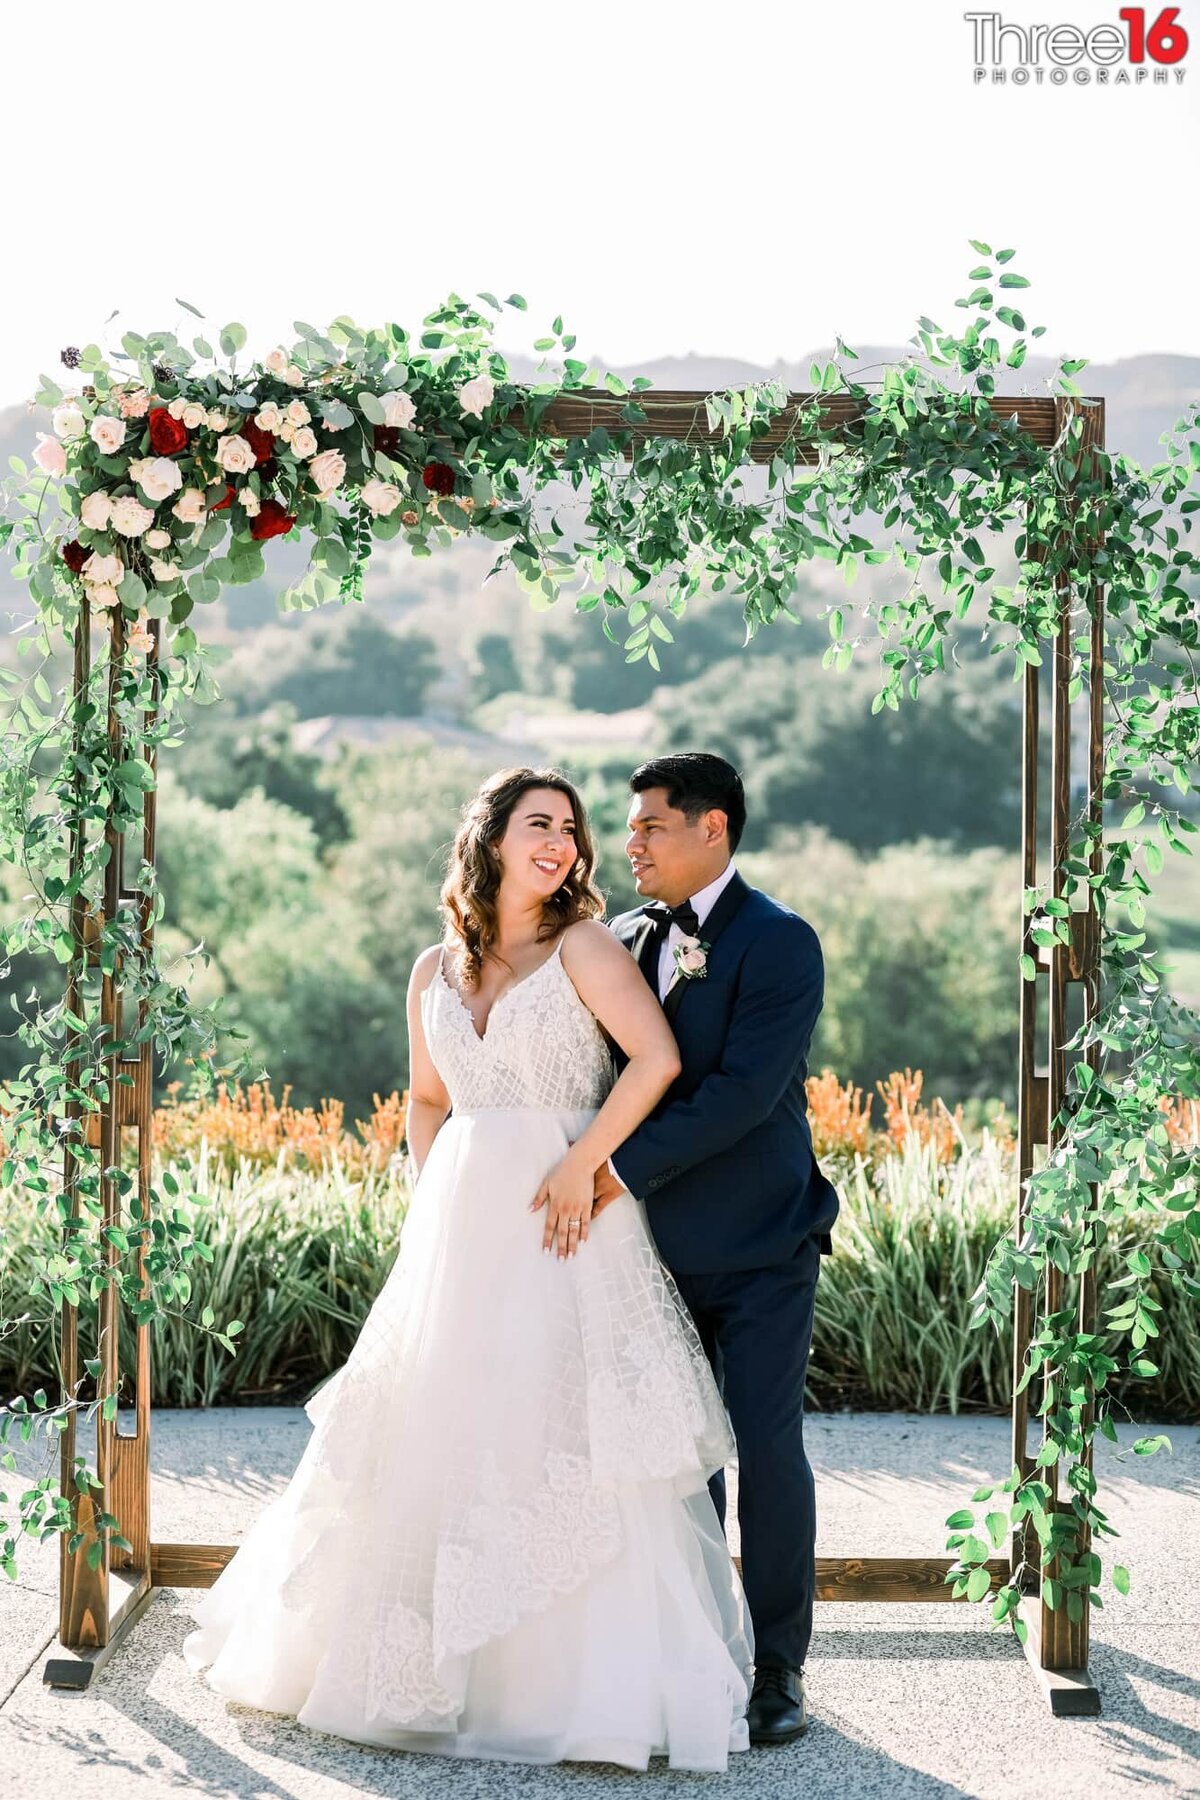 Bride looks back at her Groom as he holds her waist while posing under the floral archway